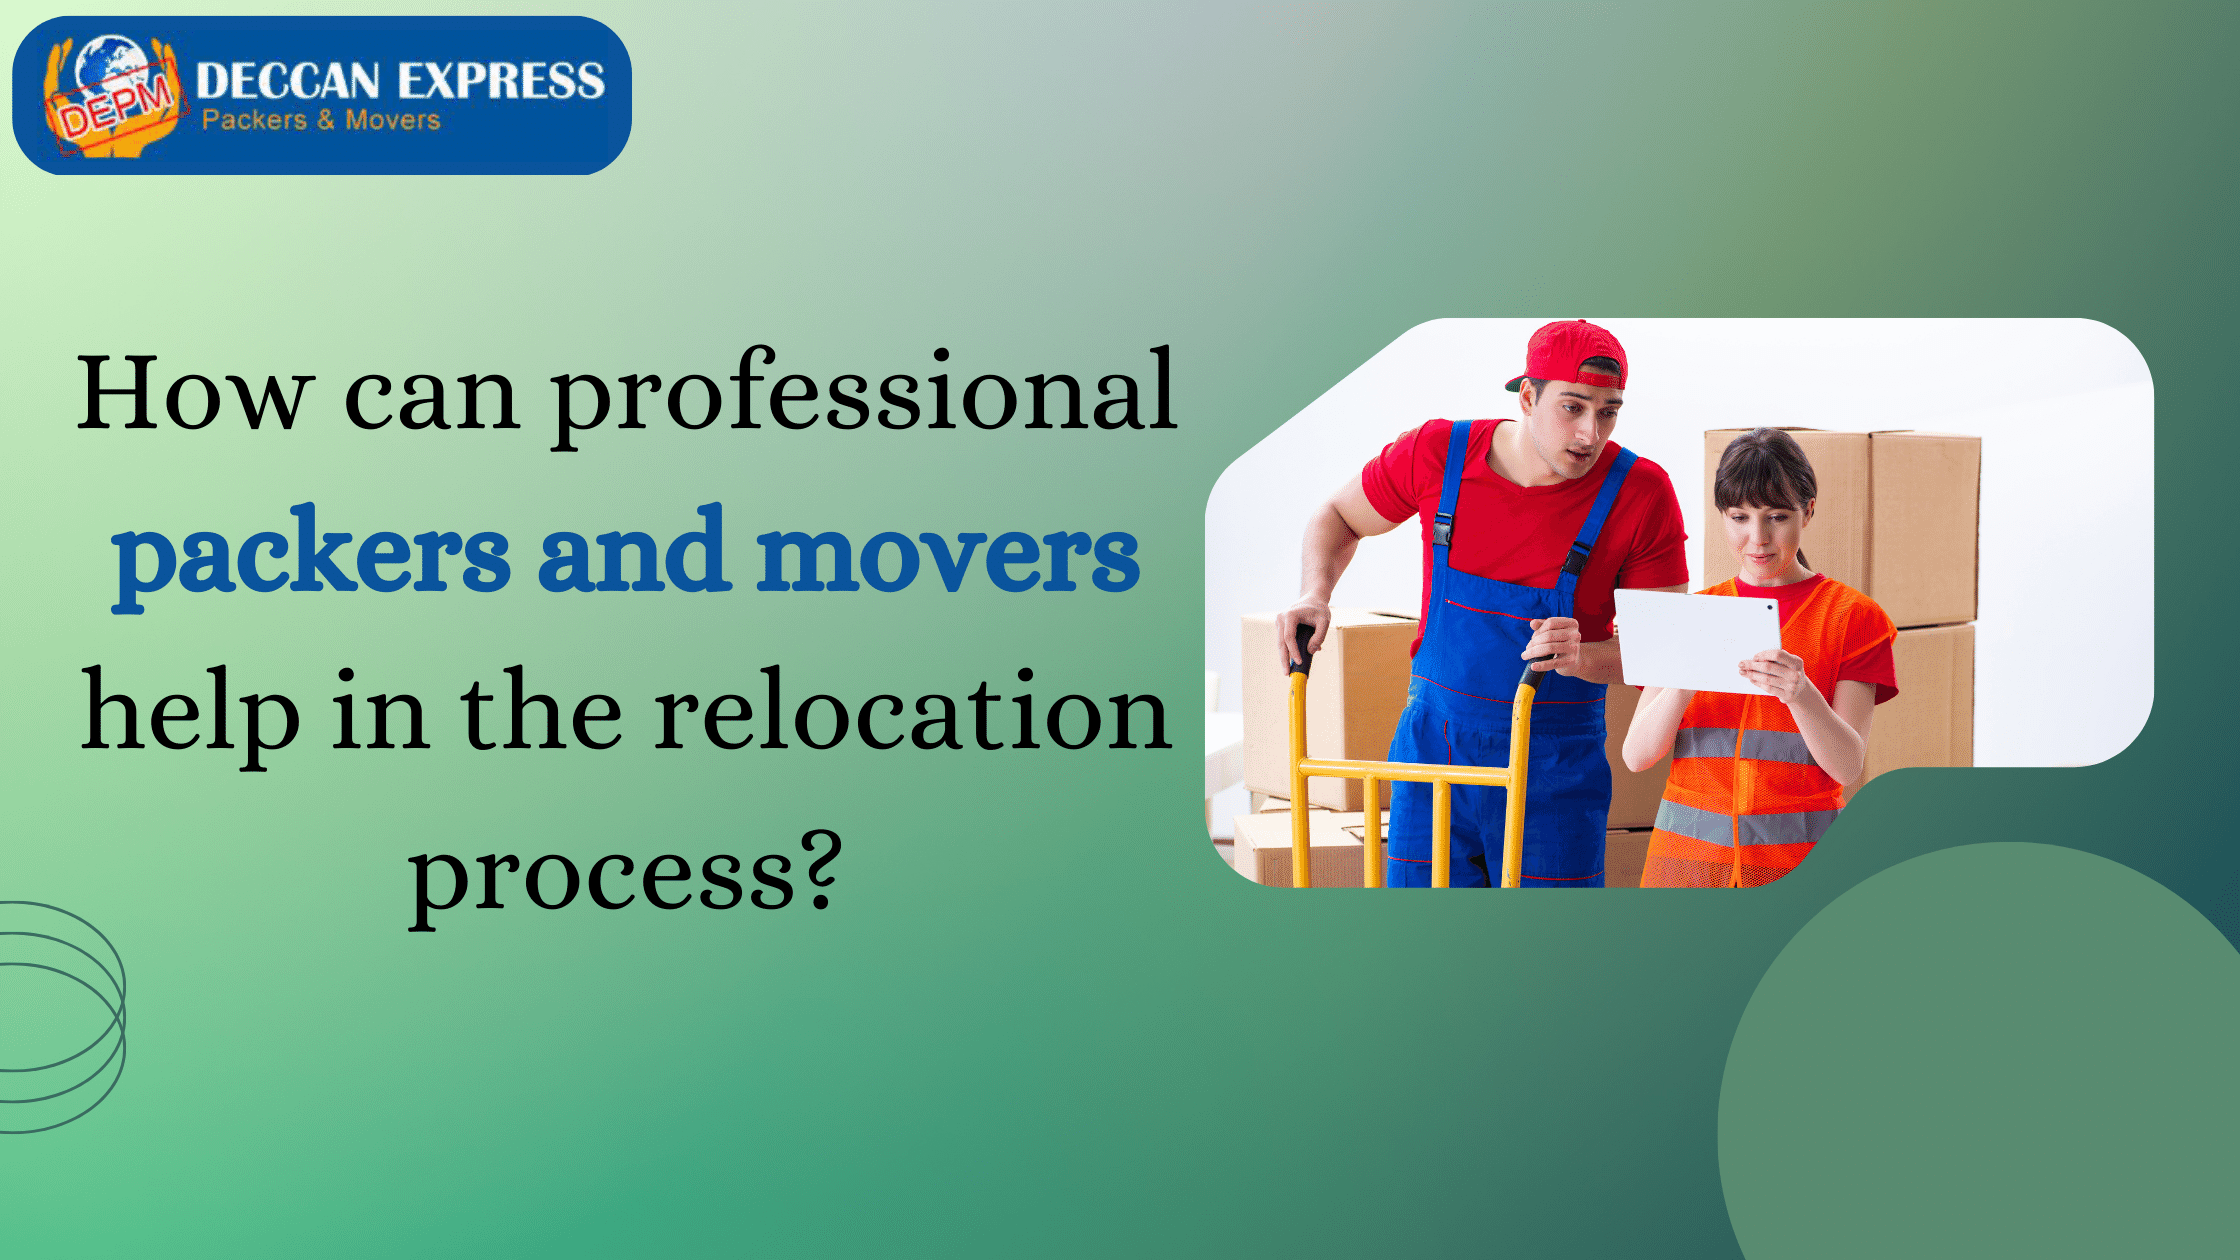 How can professional packers and movers help in the relocation process?